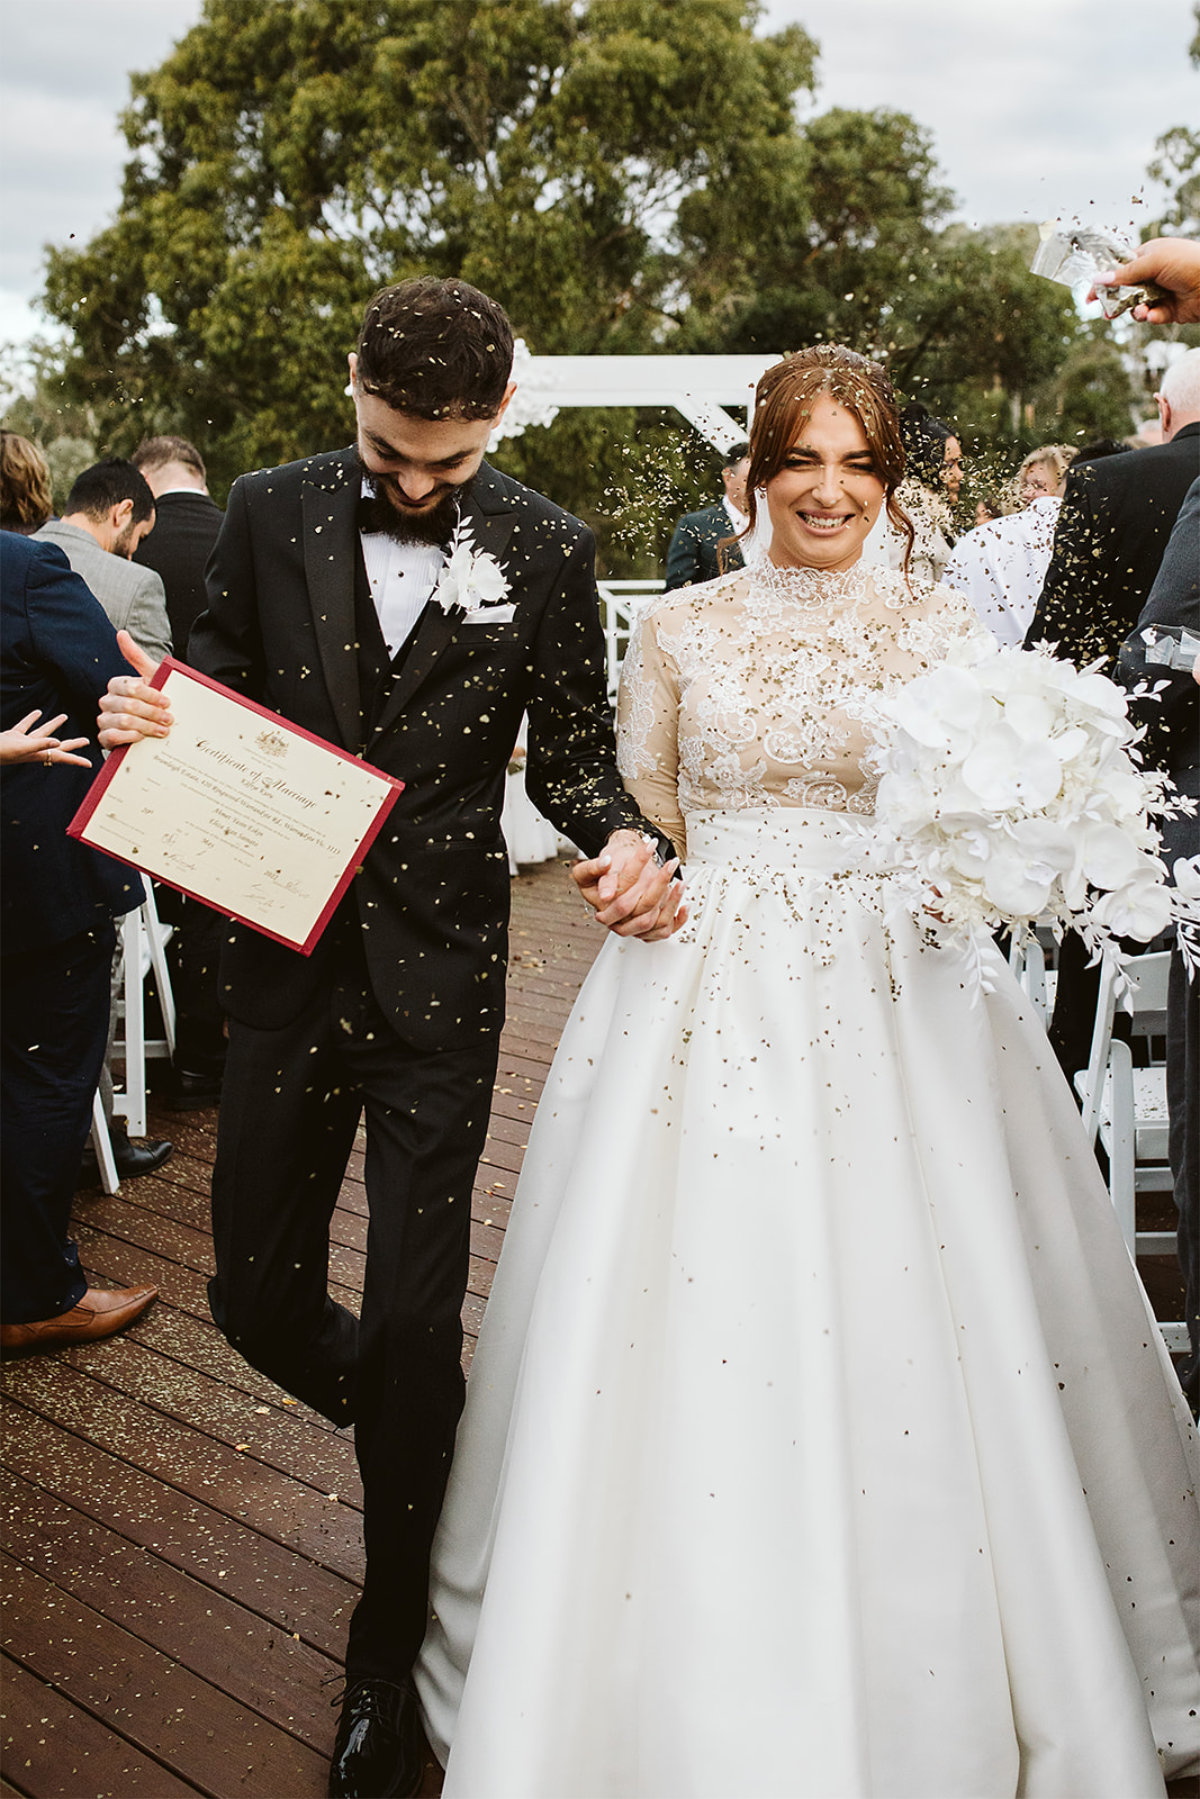 Eliza and Ahmet's Bramleigh Estate wedding captured by Belle Martin Photography